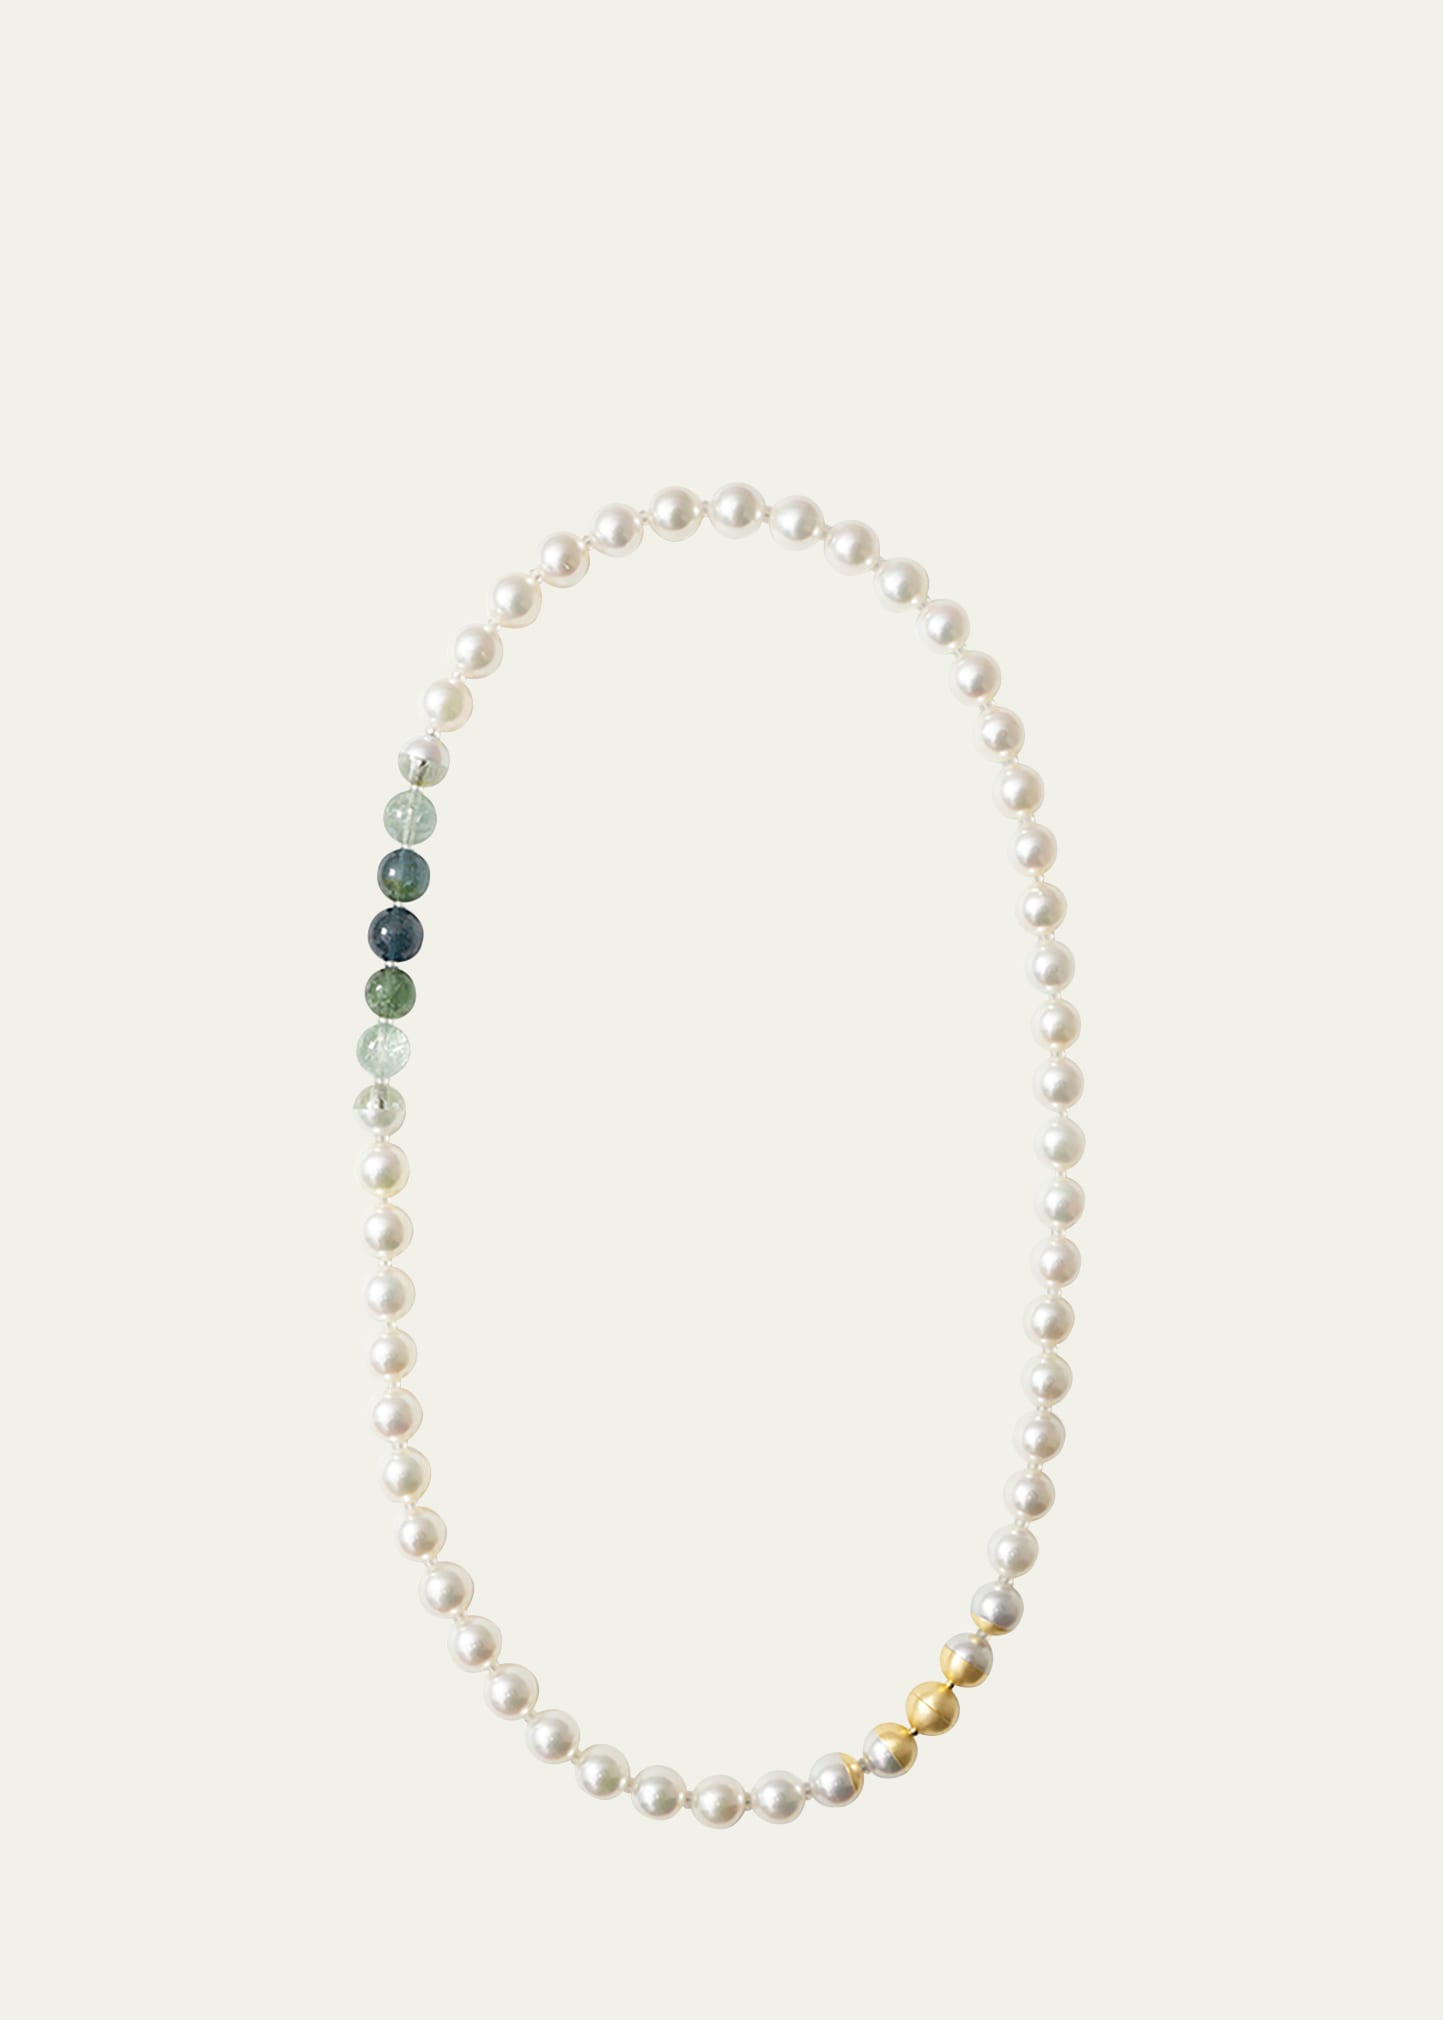 Yutai 18k Yellow Gold Sectional Pearl Necklace With Tourmaline And Cultured White Akoya Pearls In Neutral